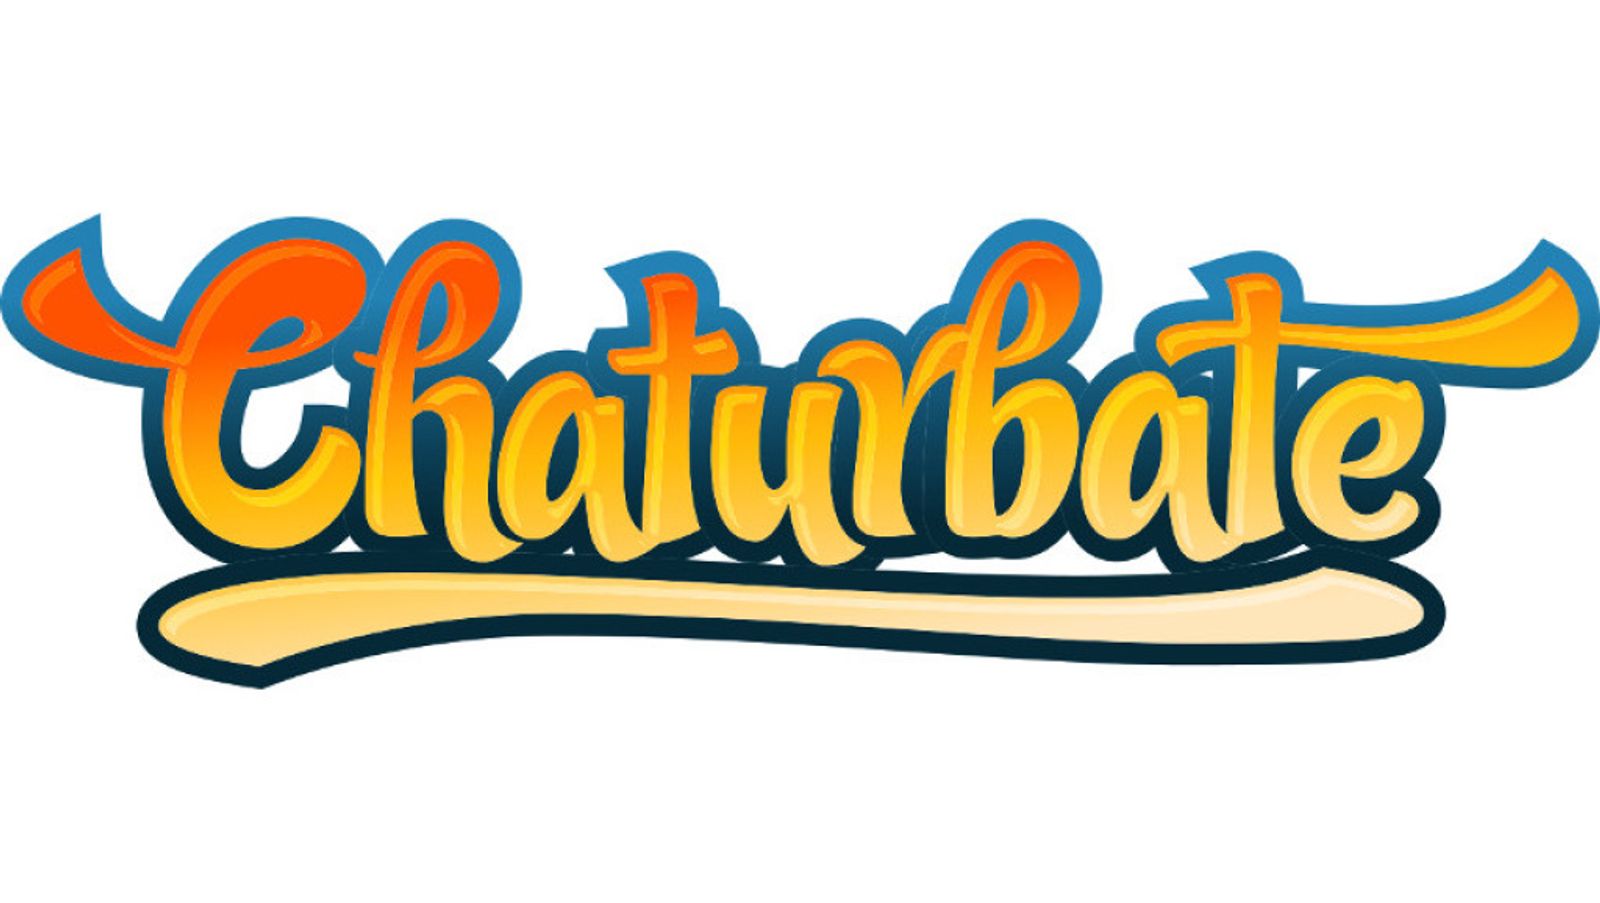 Chaturbate Wins Multiple Trophies at 2018 GFY Awards